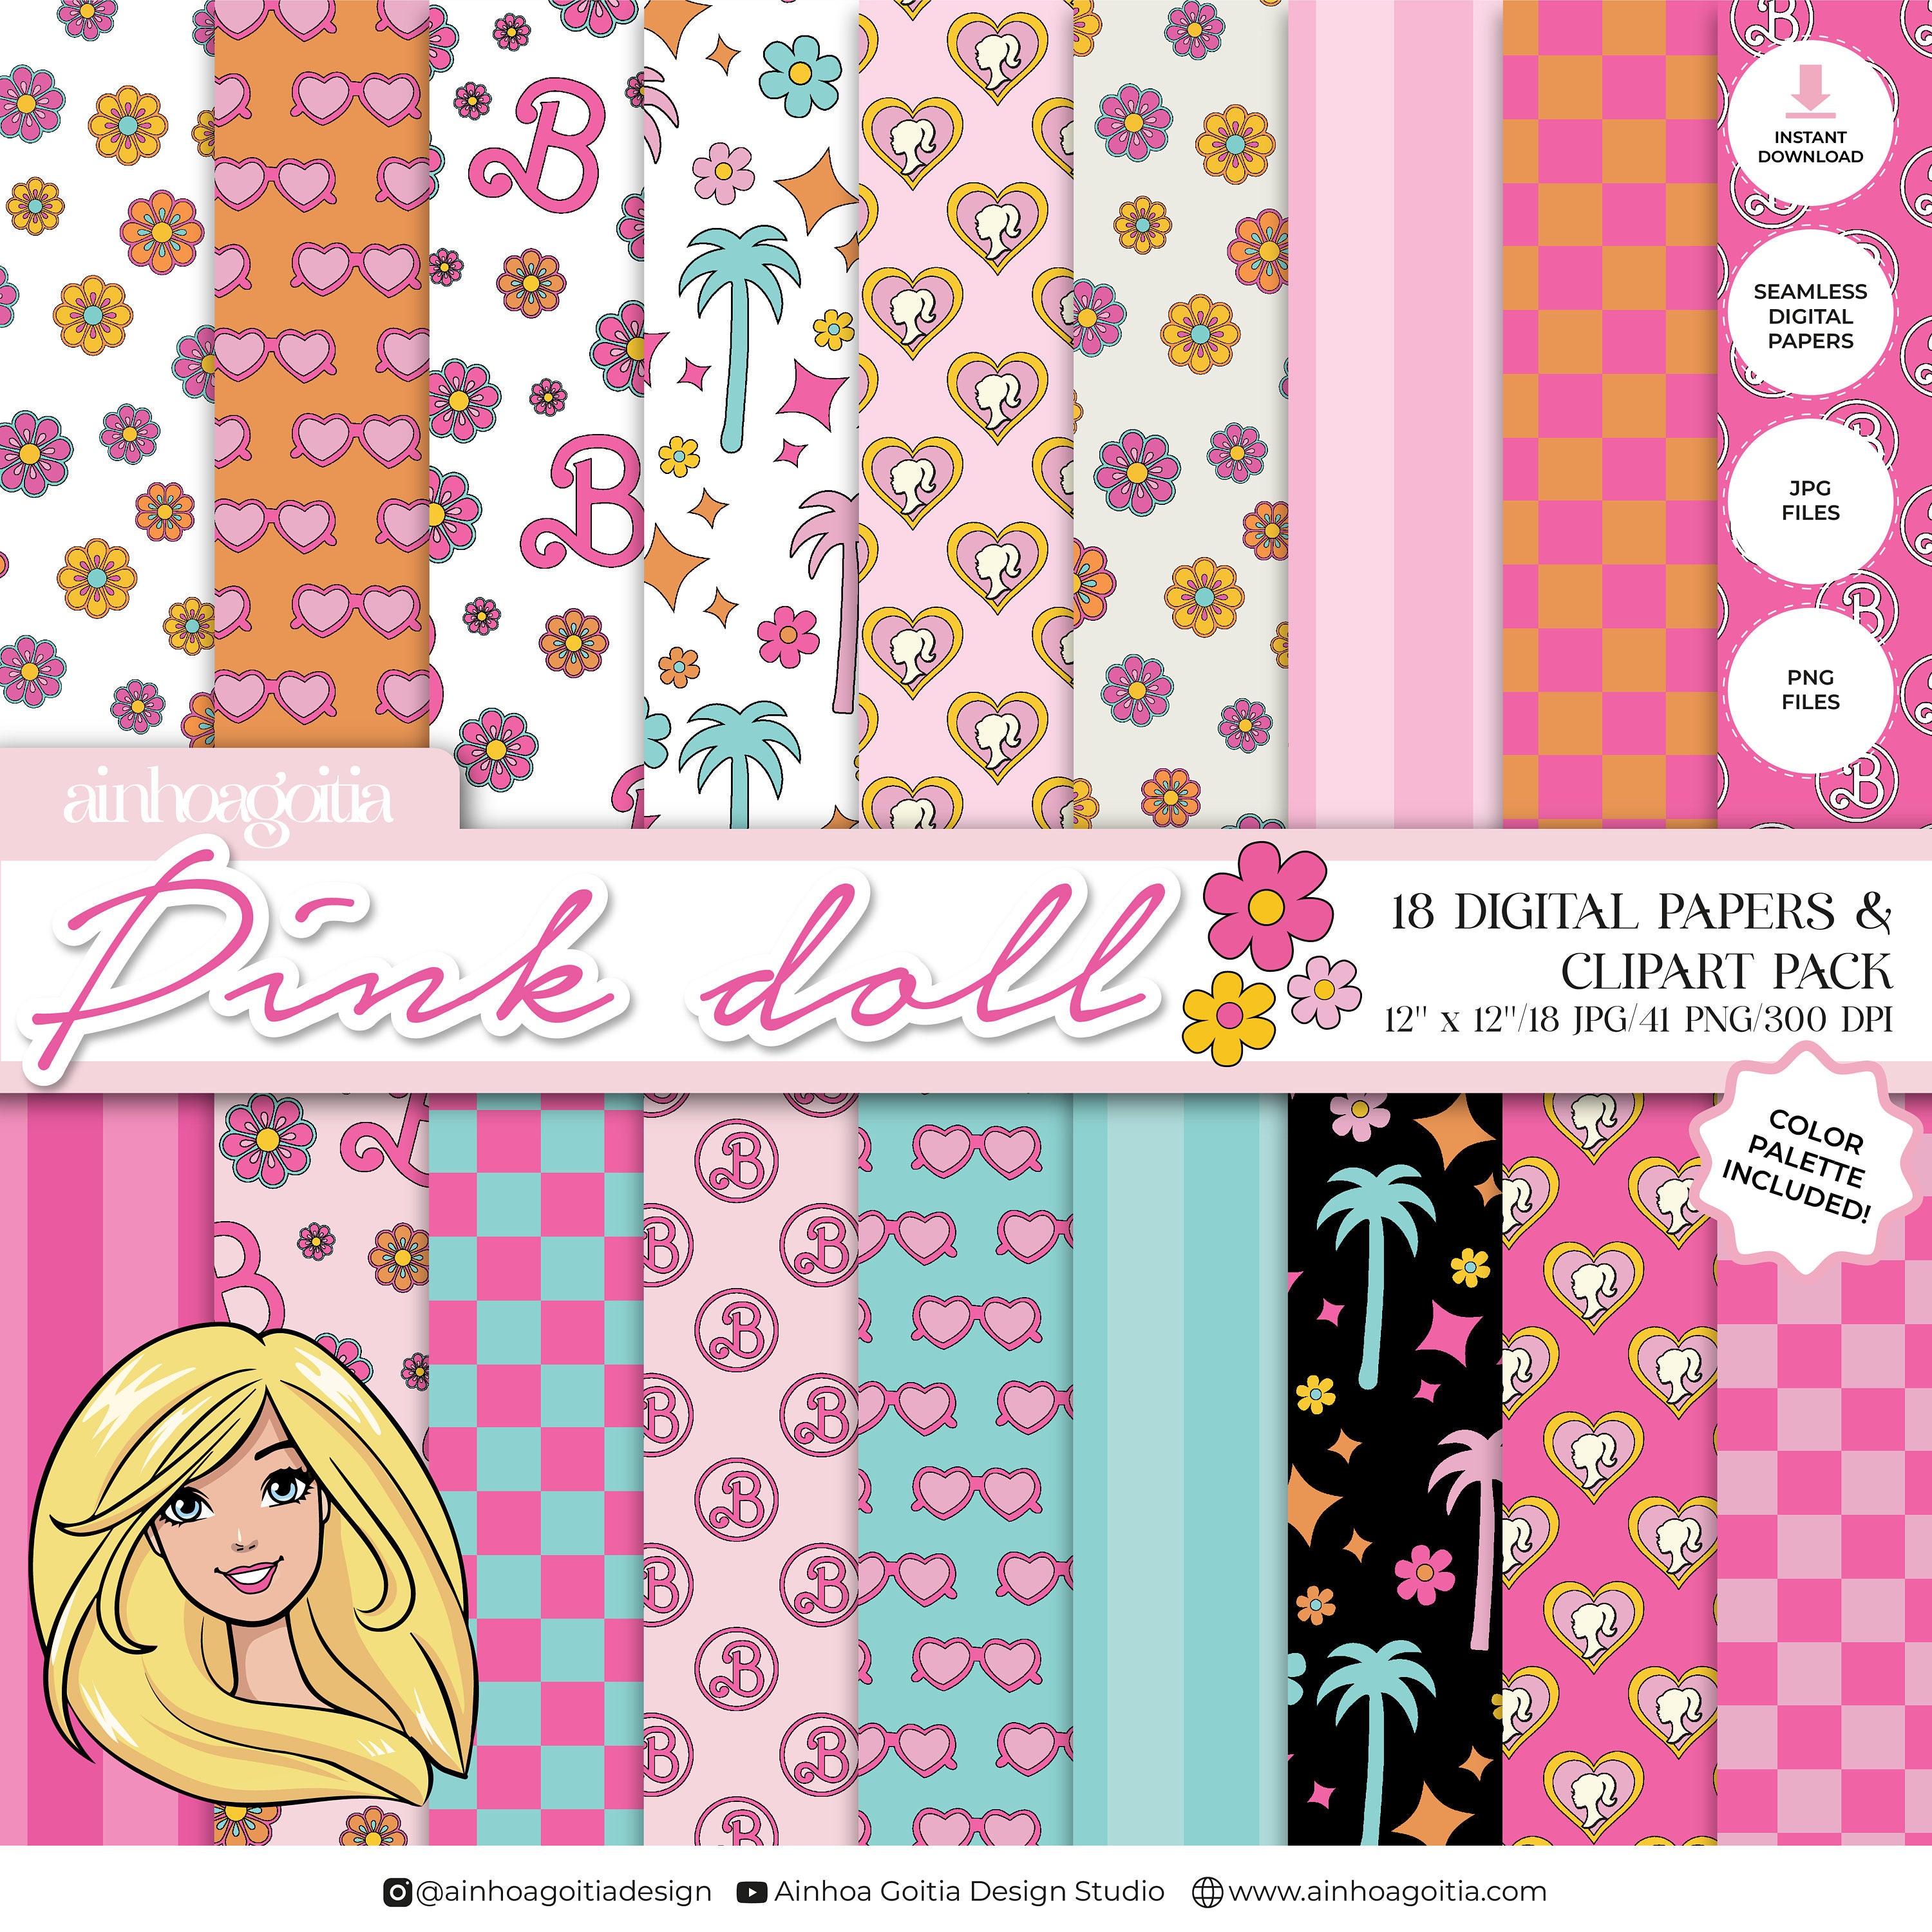 Shades of Pink Digital Paper Pack 